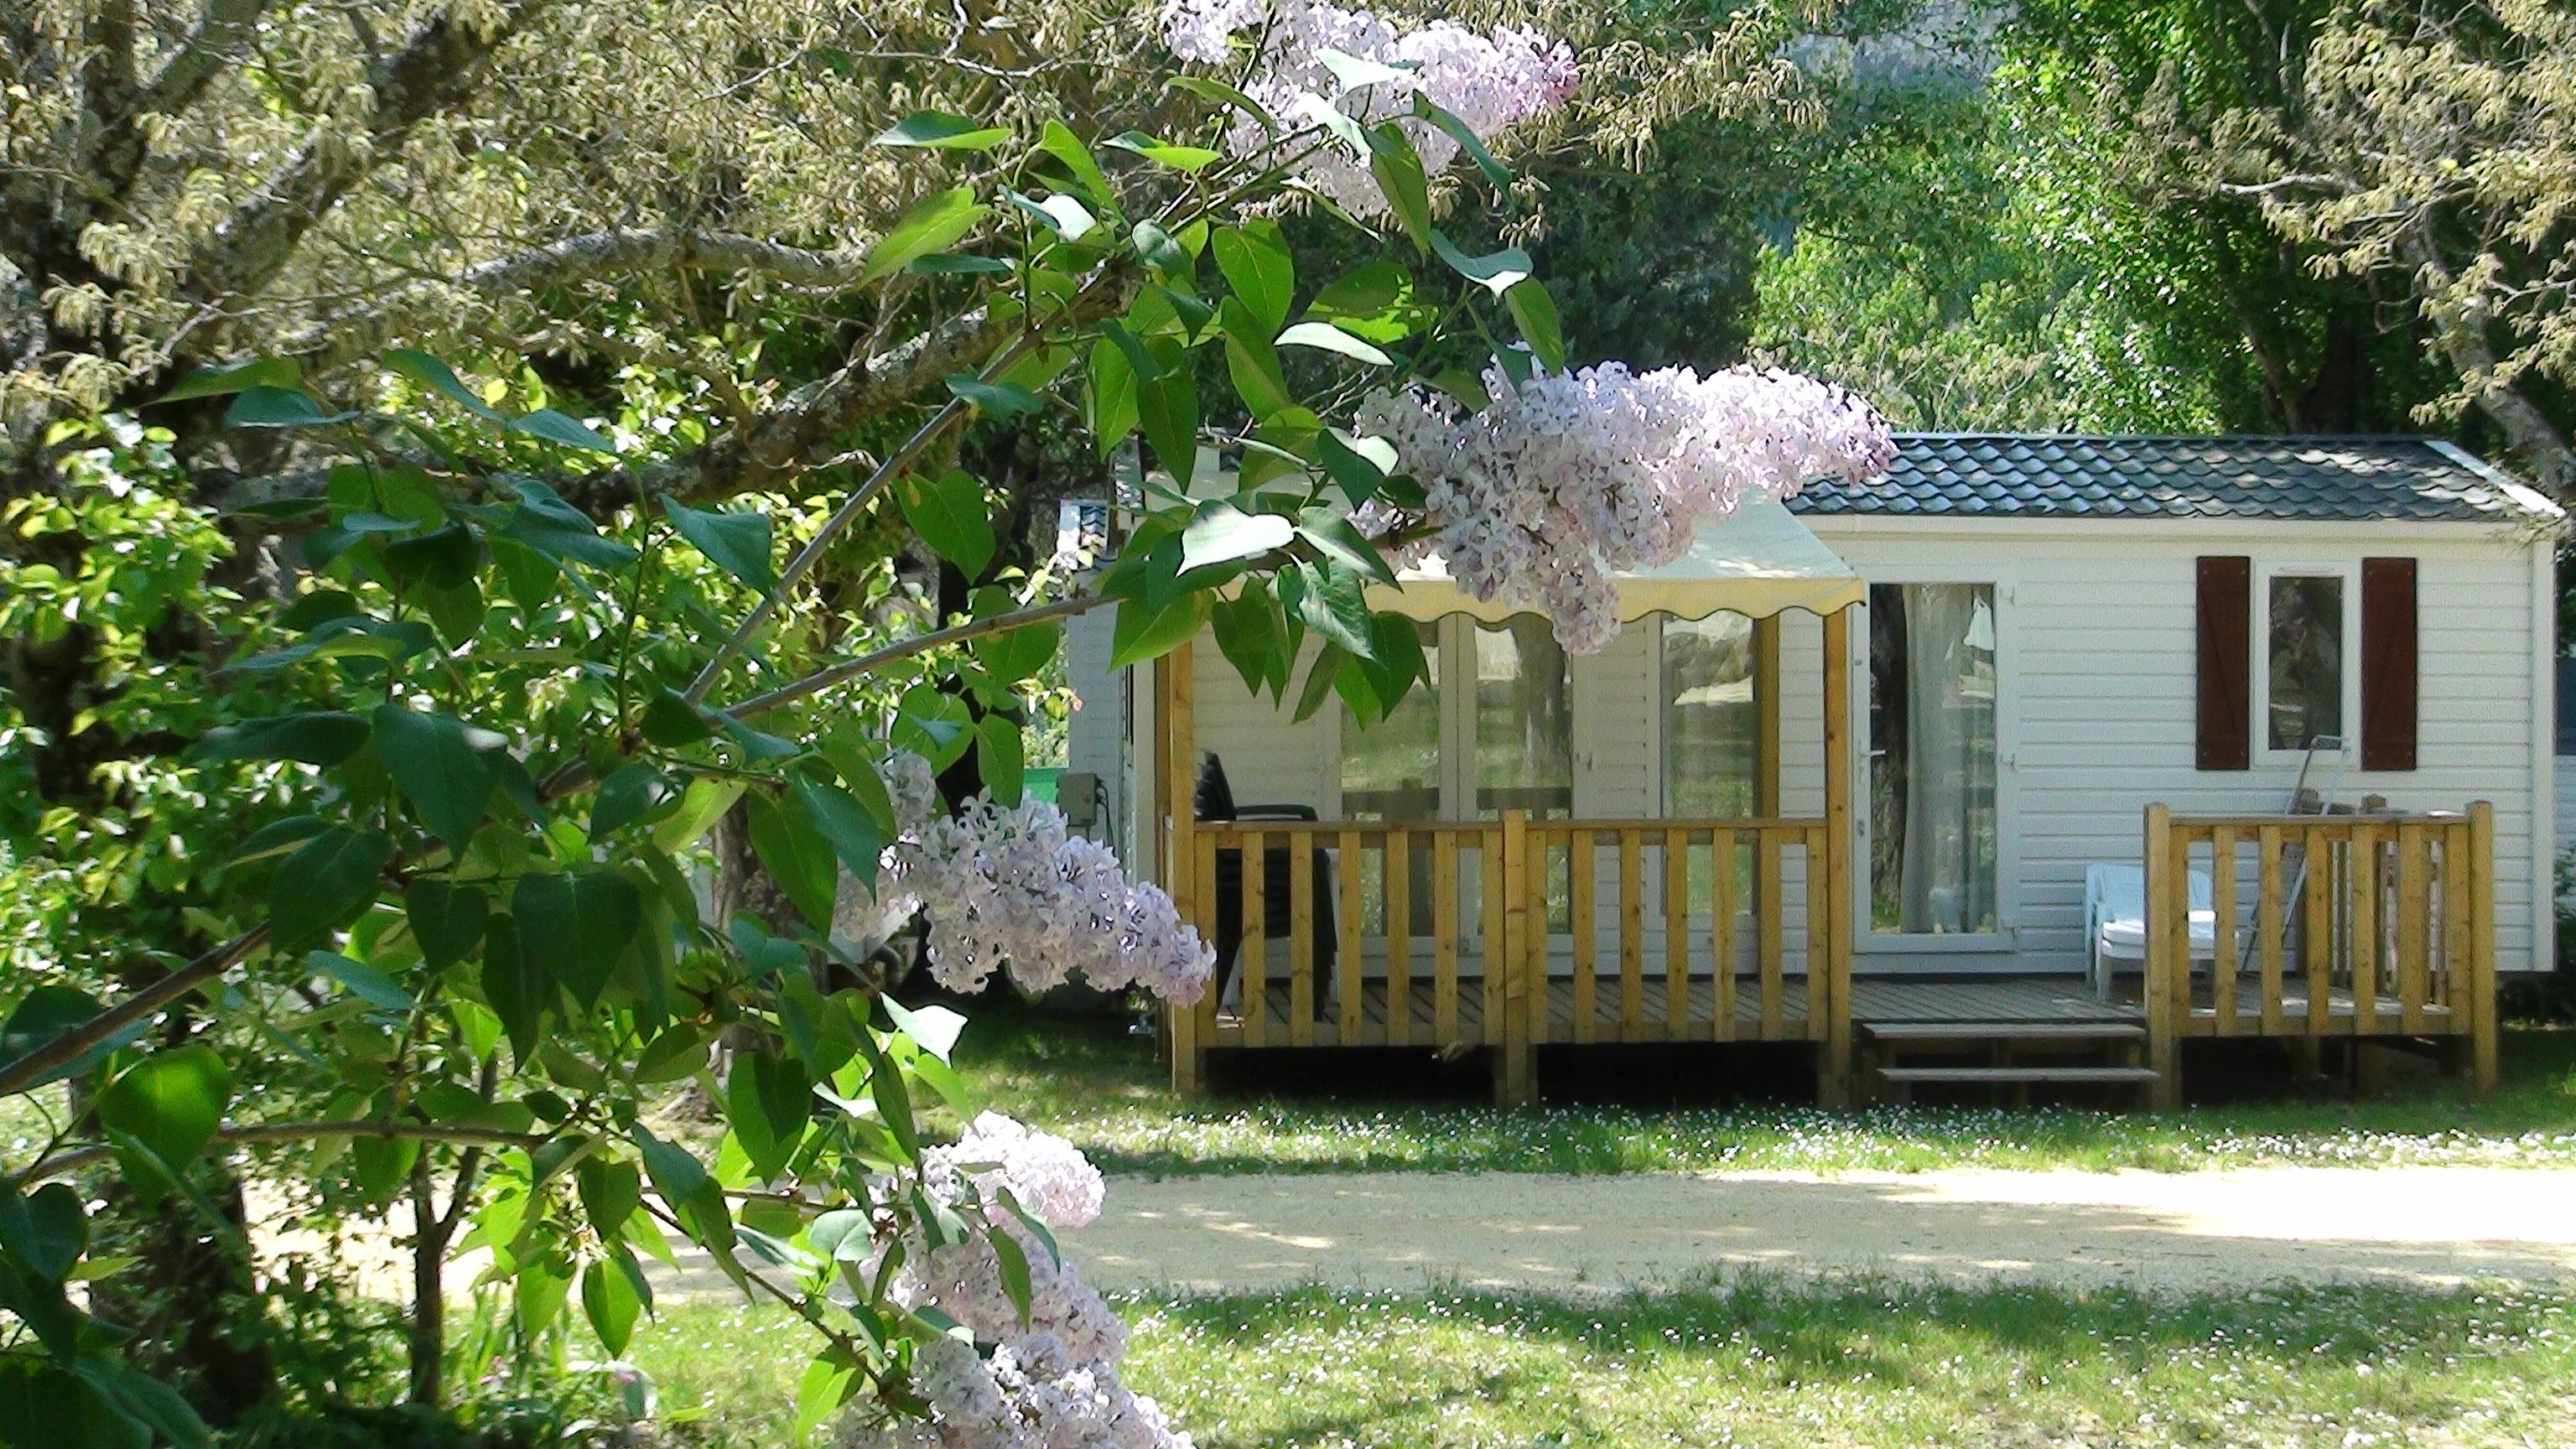 Accommodation - Mobilhome Luxe 2 Bedrooms With Airconditioning Arrival On Sunday (In High Season) Minimum 3 Nights - Camping des Gorges